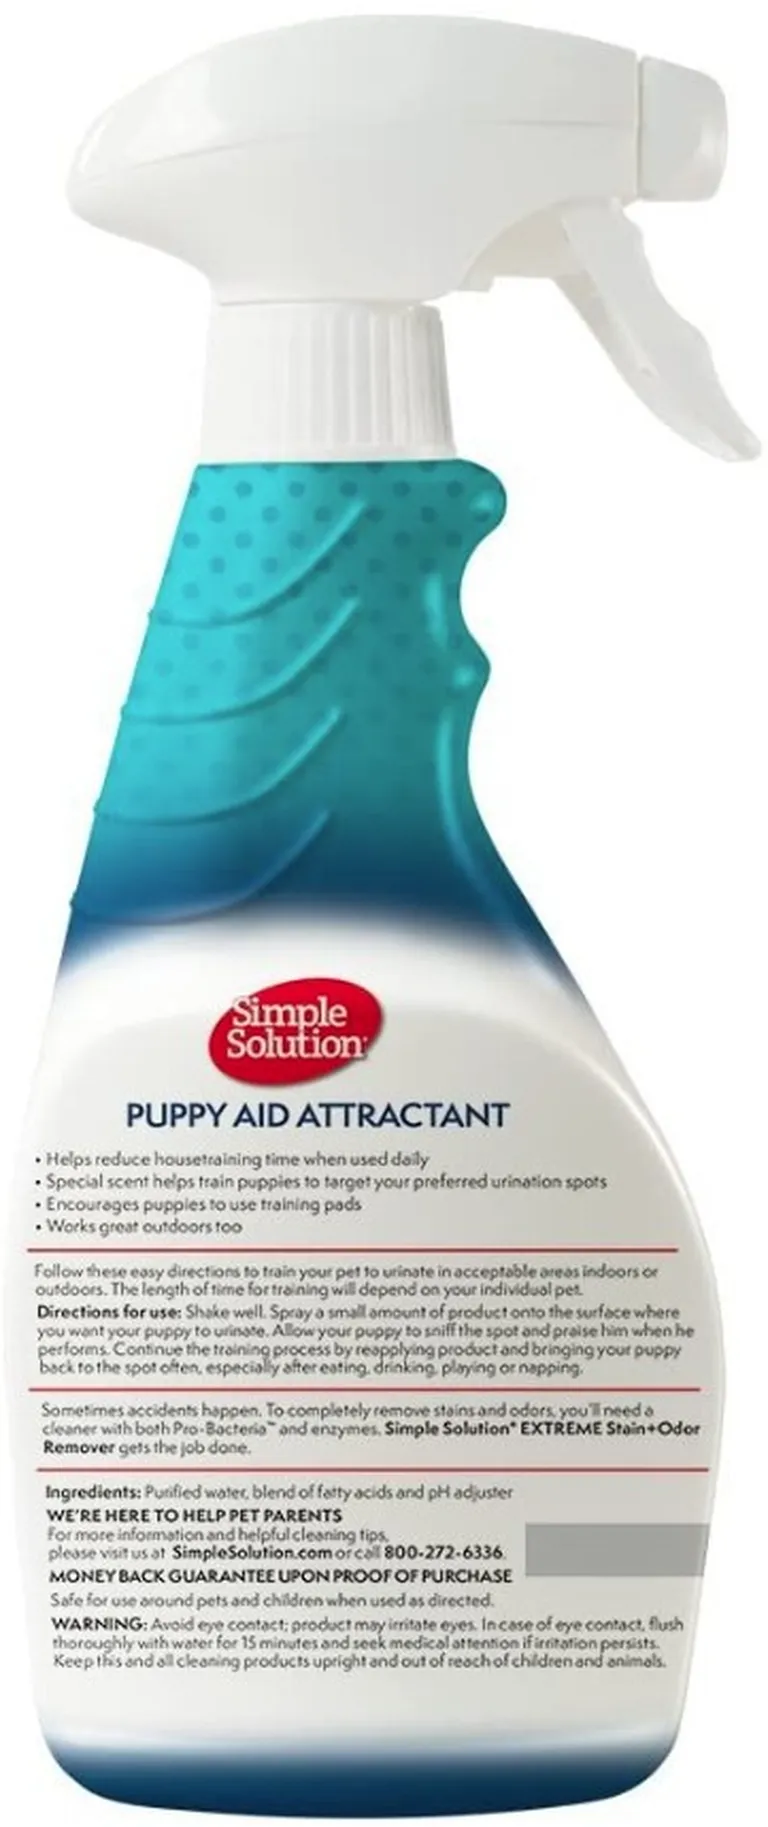 Simple Solution Puppy Aid Attractant Photo 2